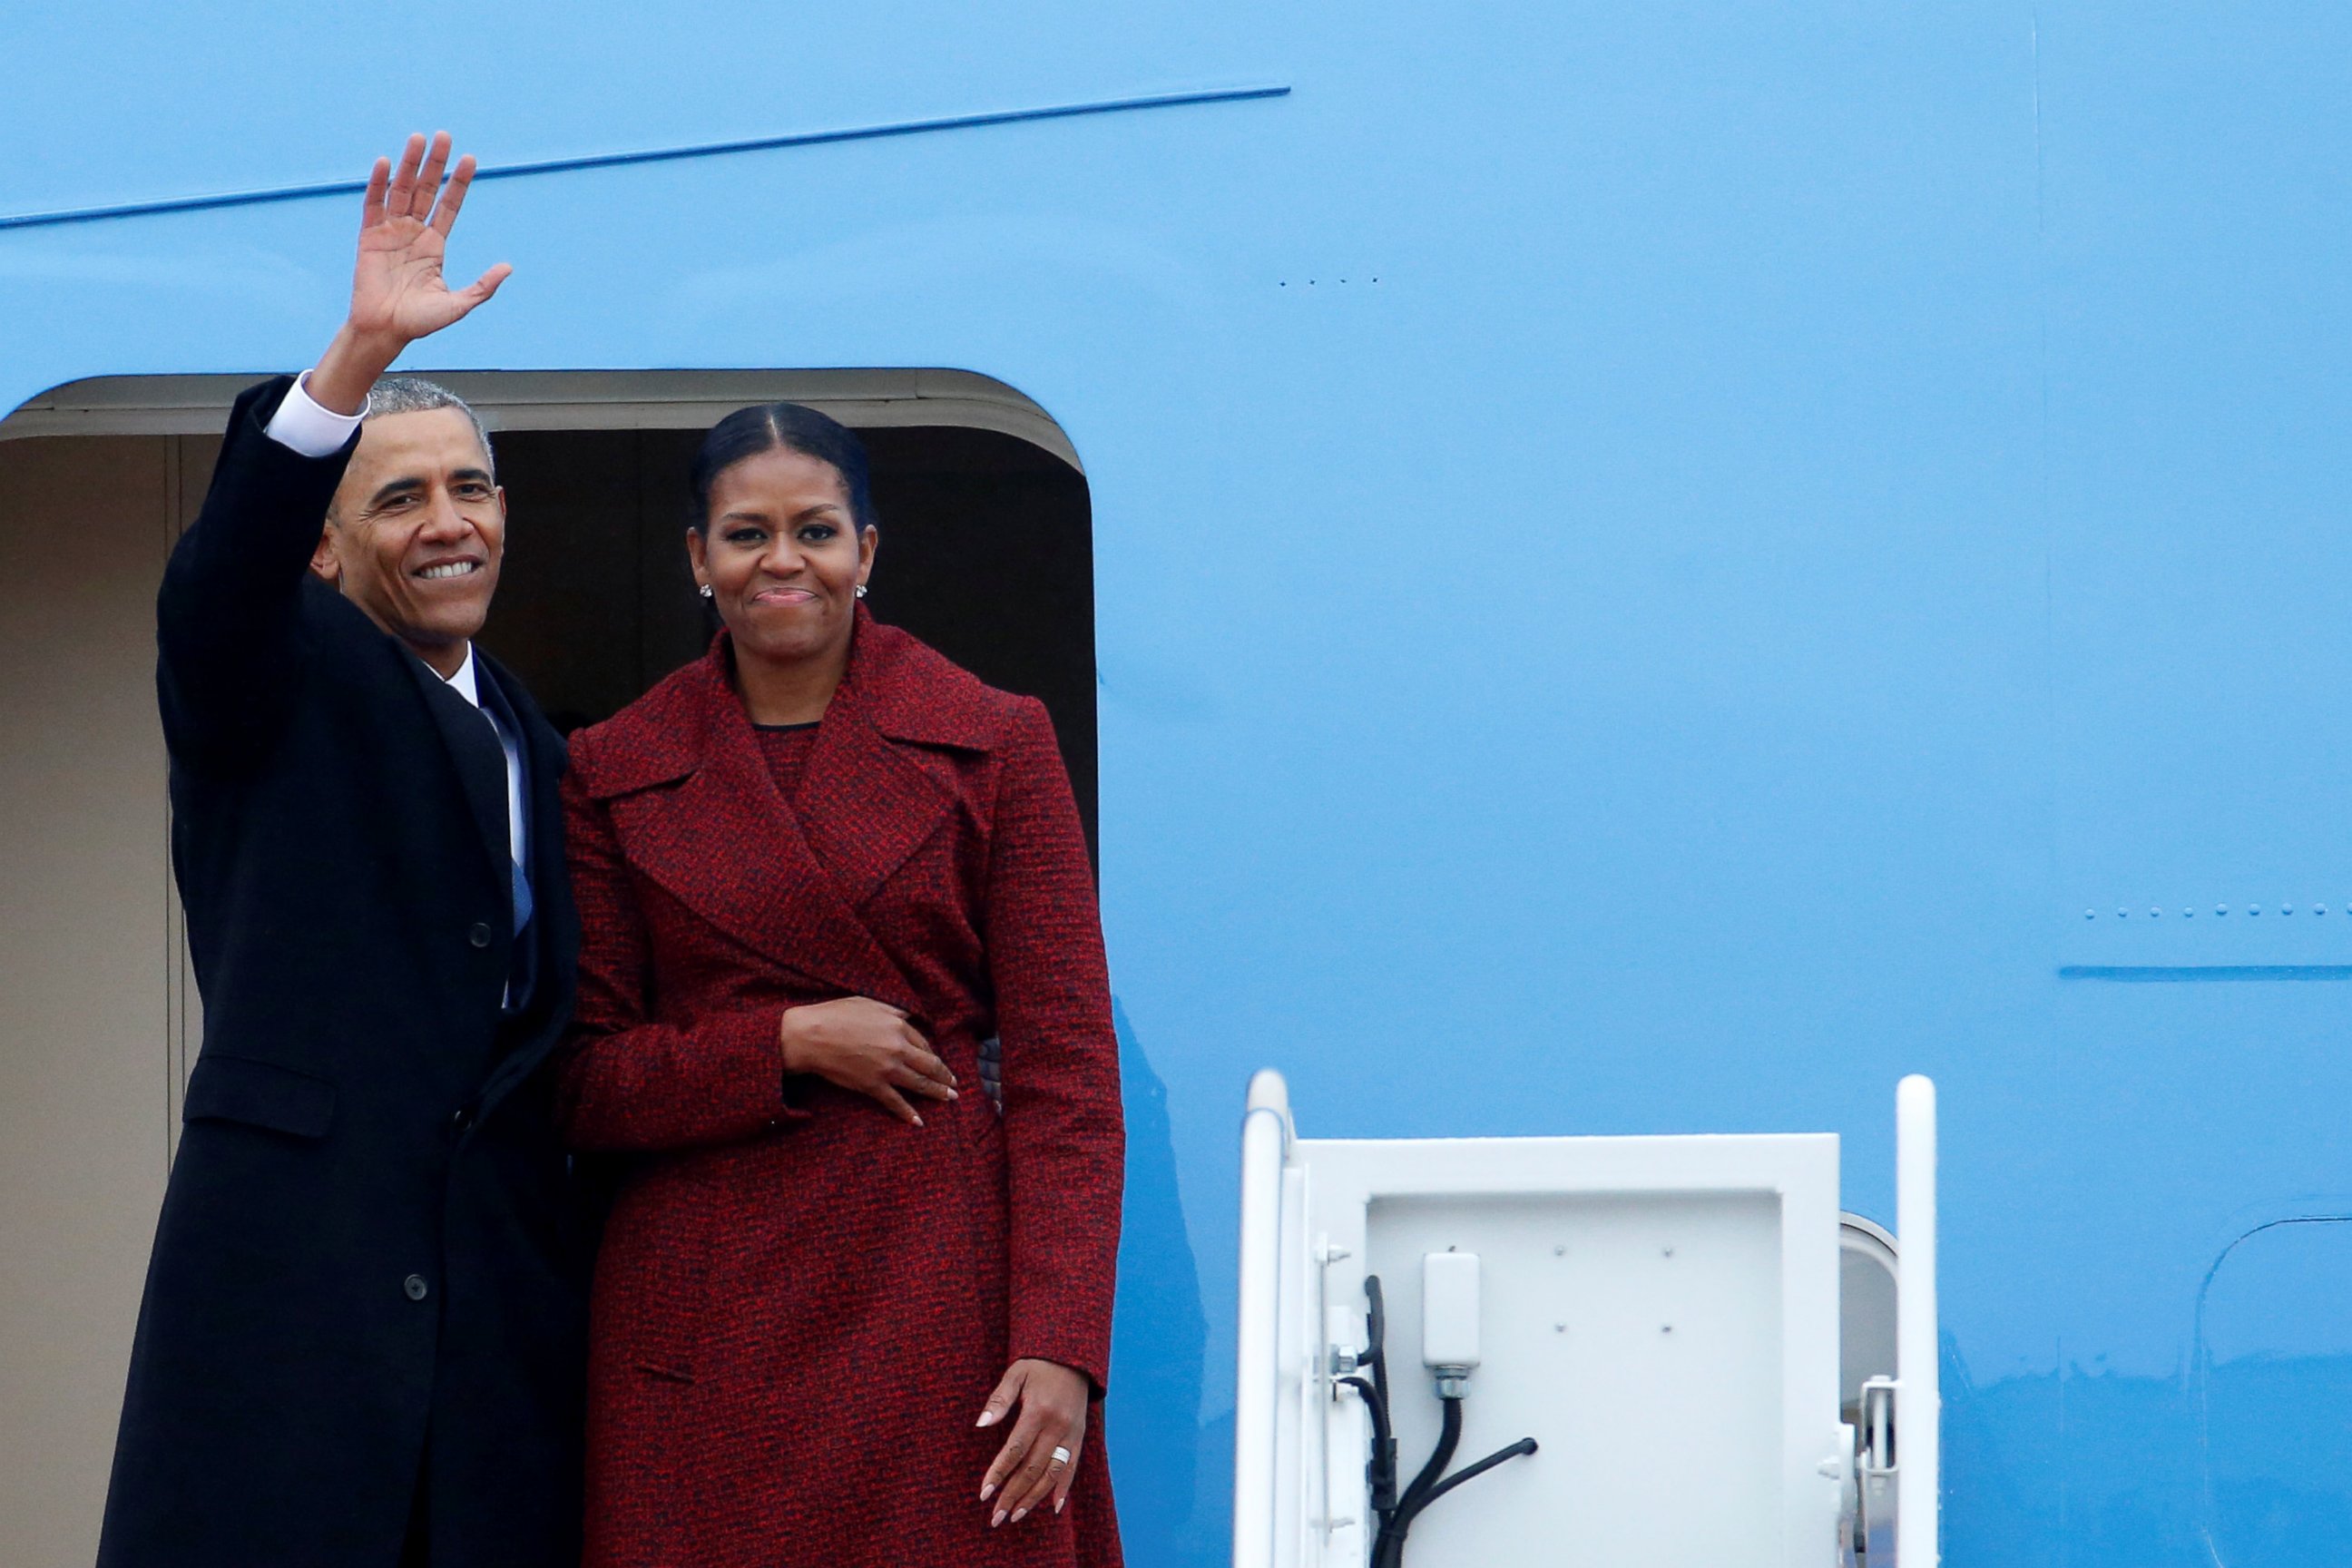 PHOTO: Former president Barack Obama waves with his wife Michelle as they board Special Air Mission 28000, a Boeing 747 which serves as Air Force One, at Joint Base Andrews, Maryland, Jan. 20, 2017.  